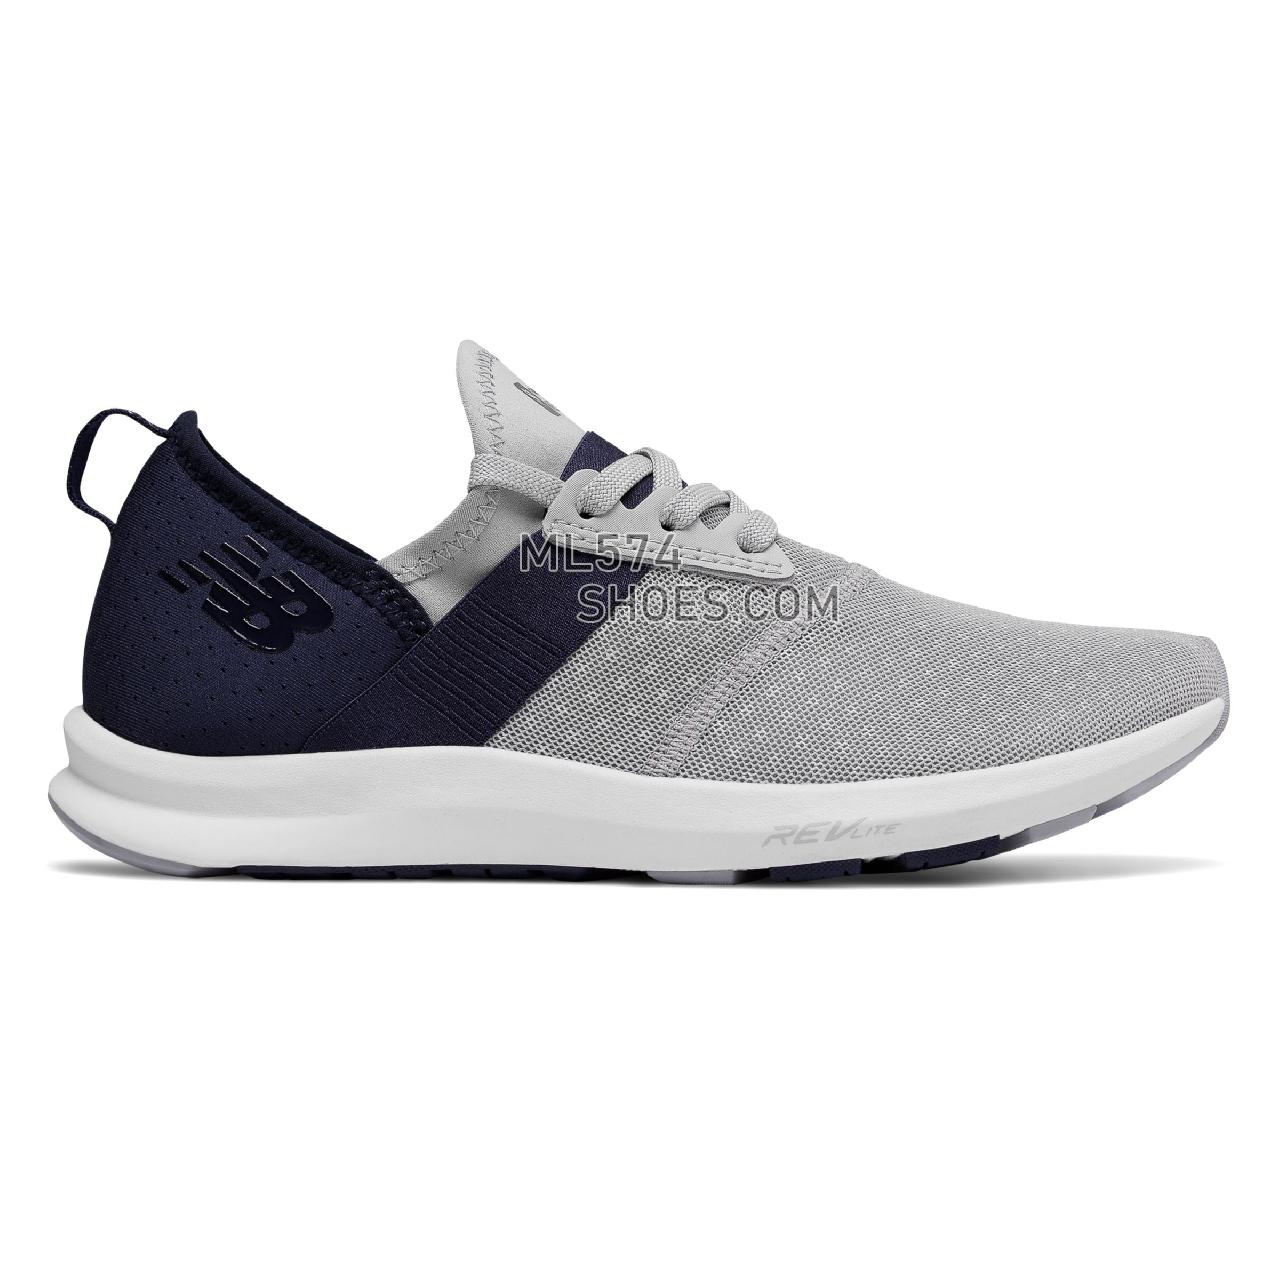 New Balance FuelCore NERGIZE Fun Pack - Women's  - X-training Navy with Light Grey - WXNRGFP